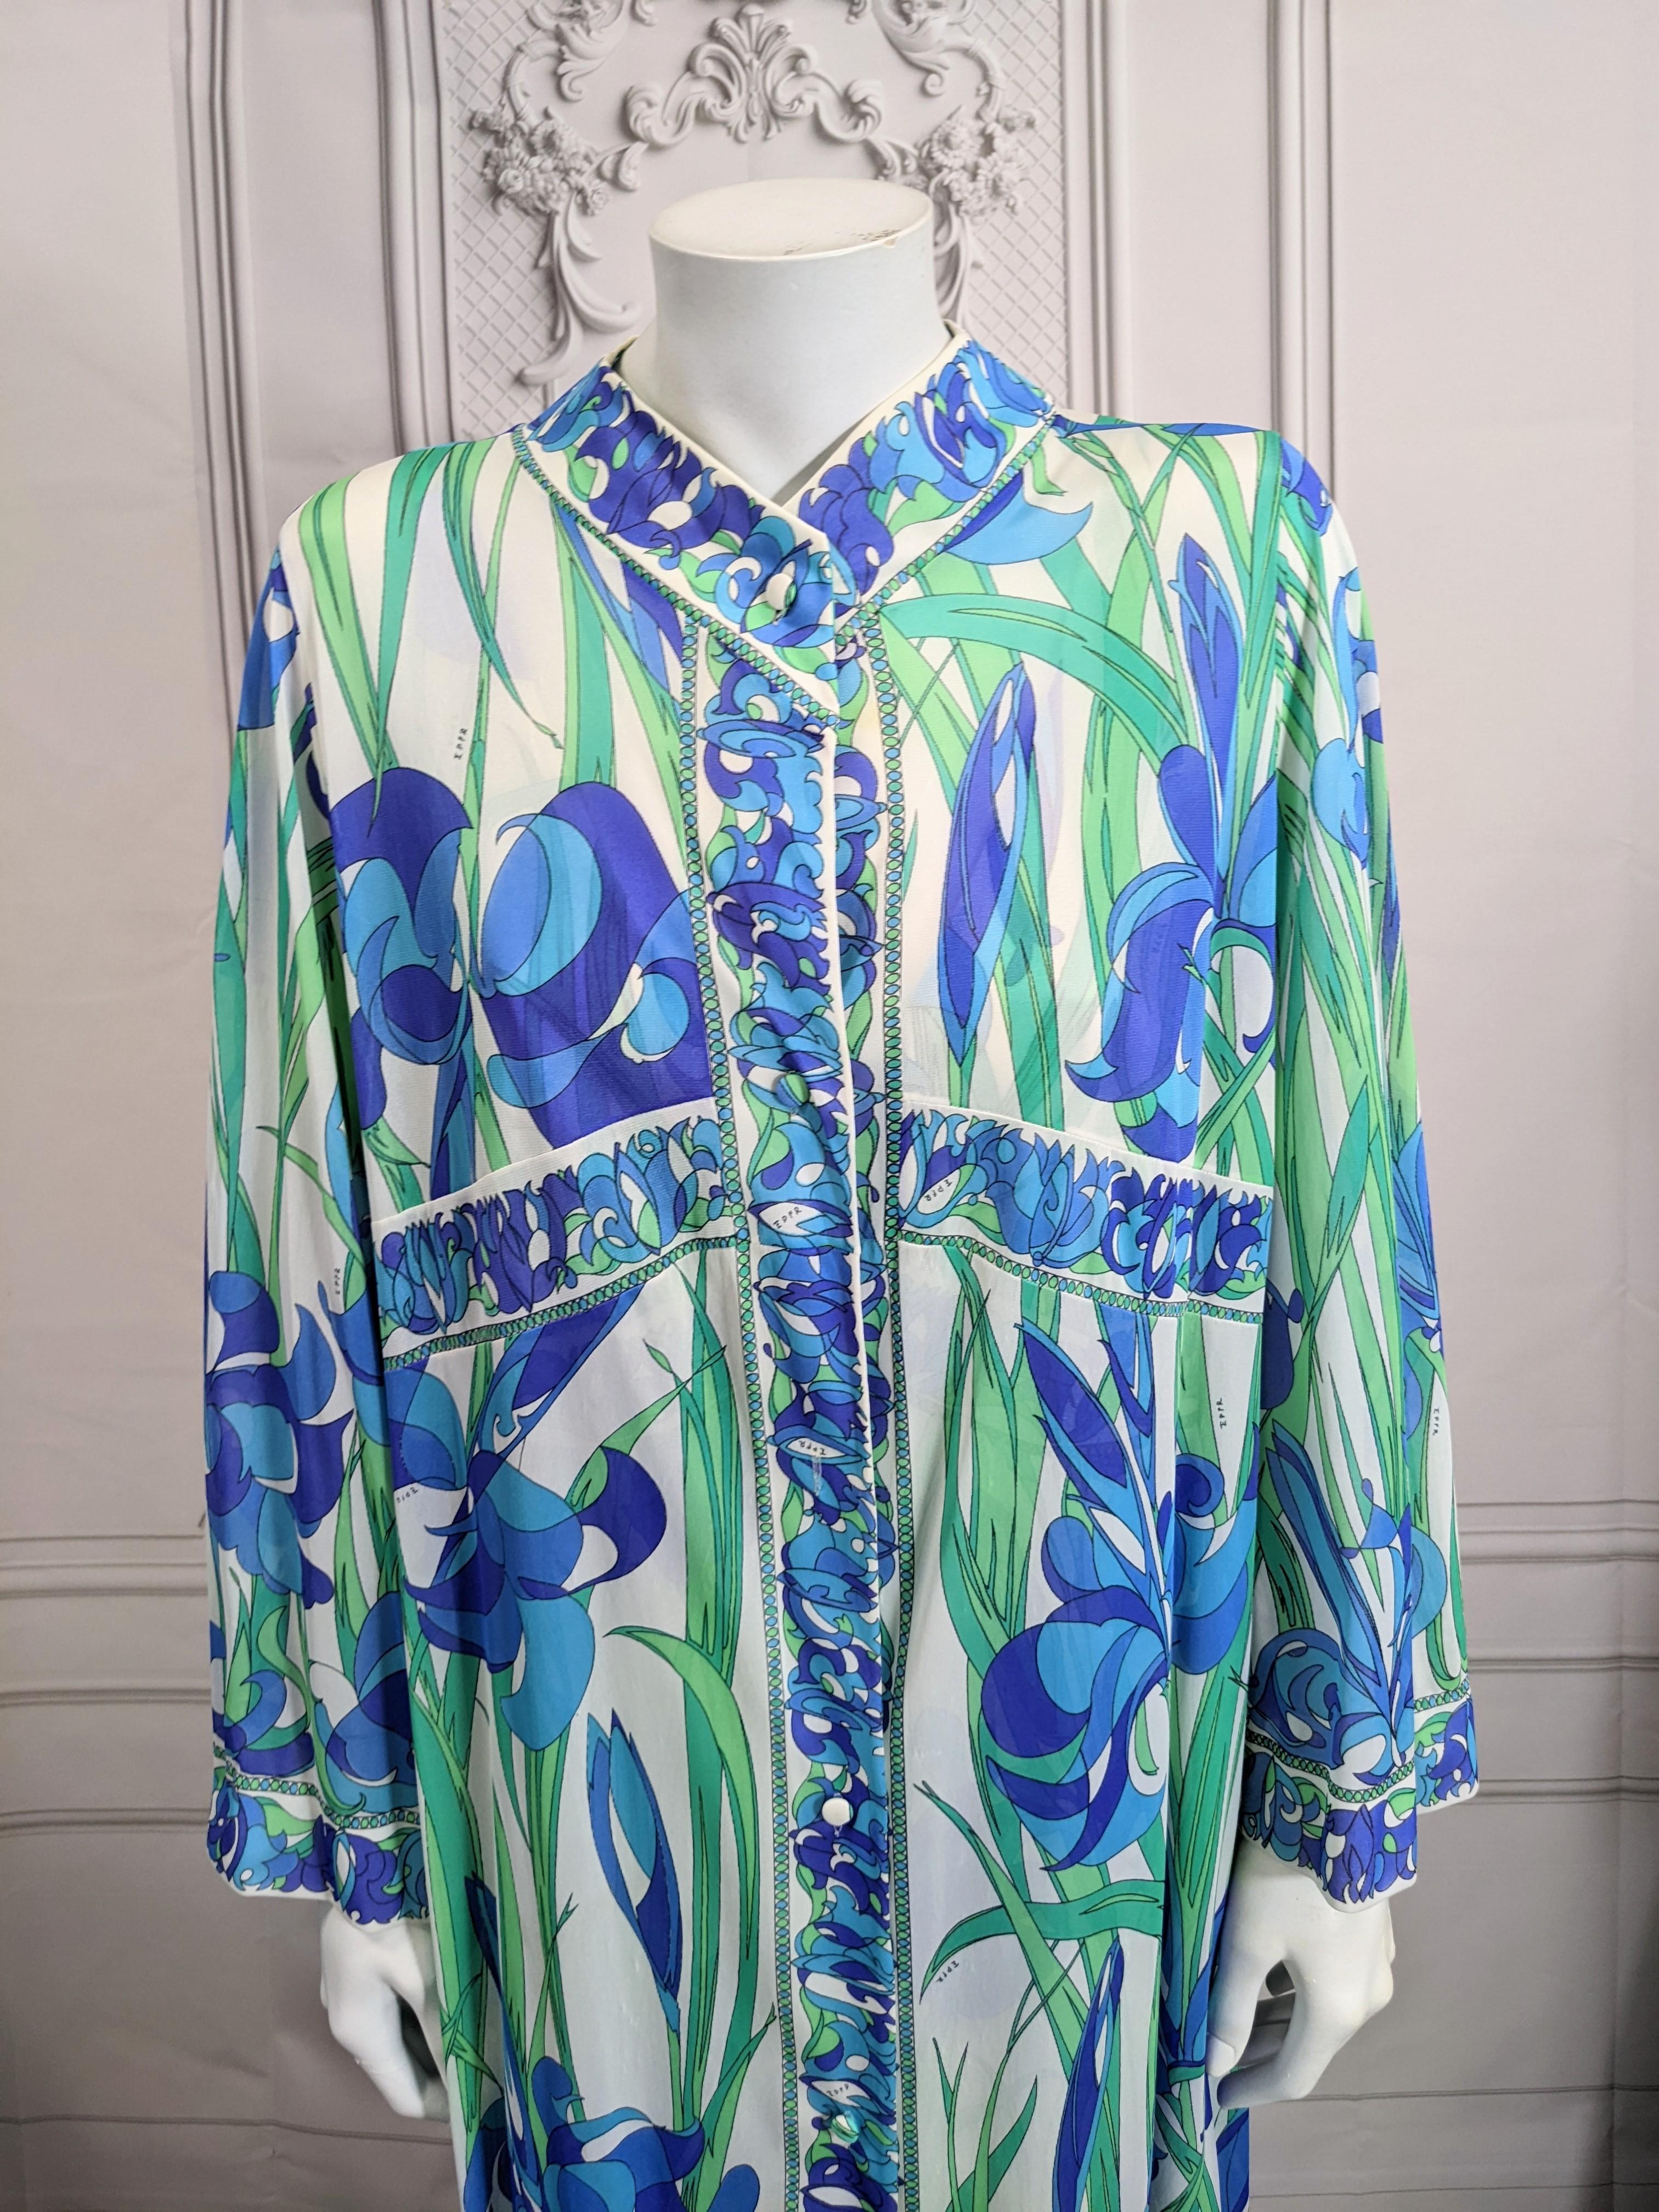 Emilio Pucci Formfit Rogers Iris Print Ensemble In Good Condition For Sale In New York, NY